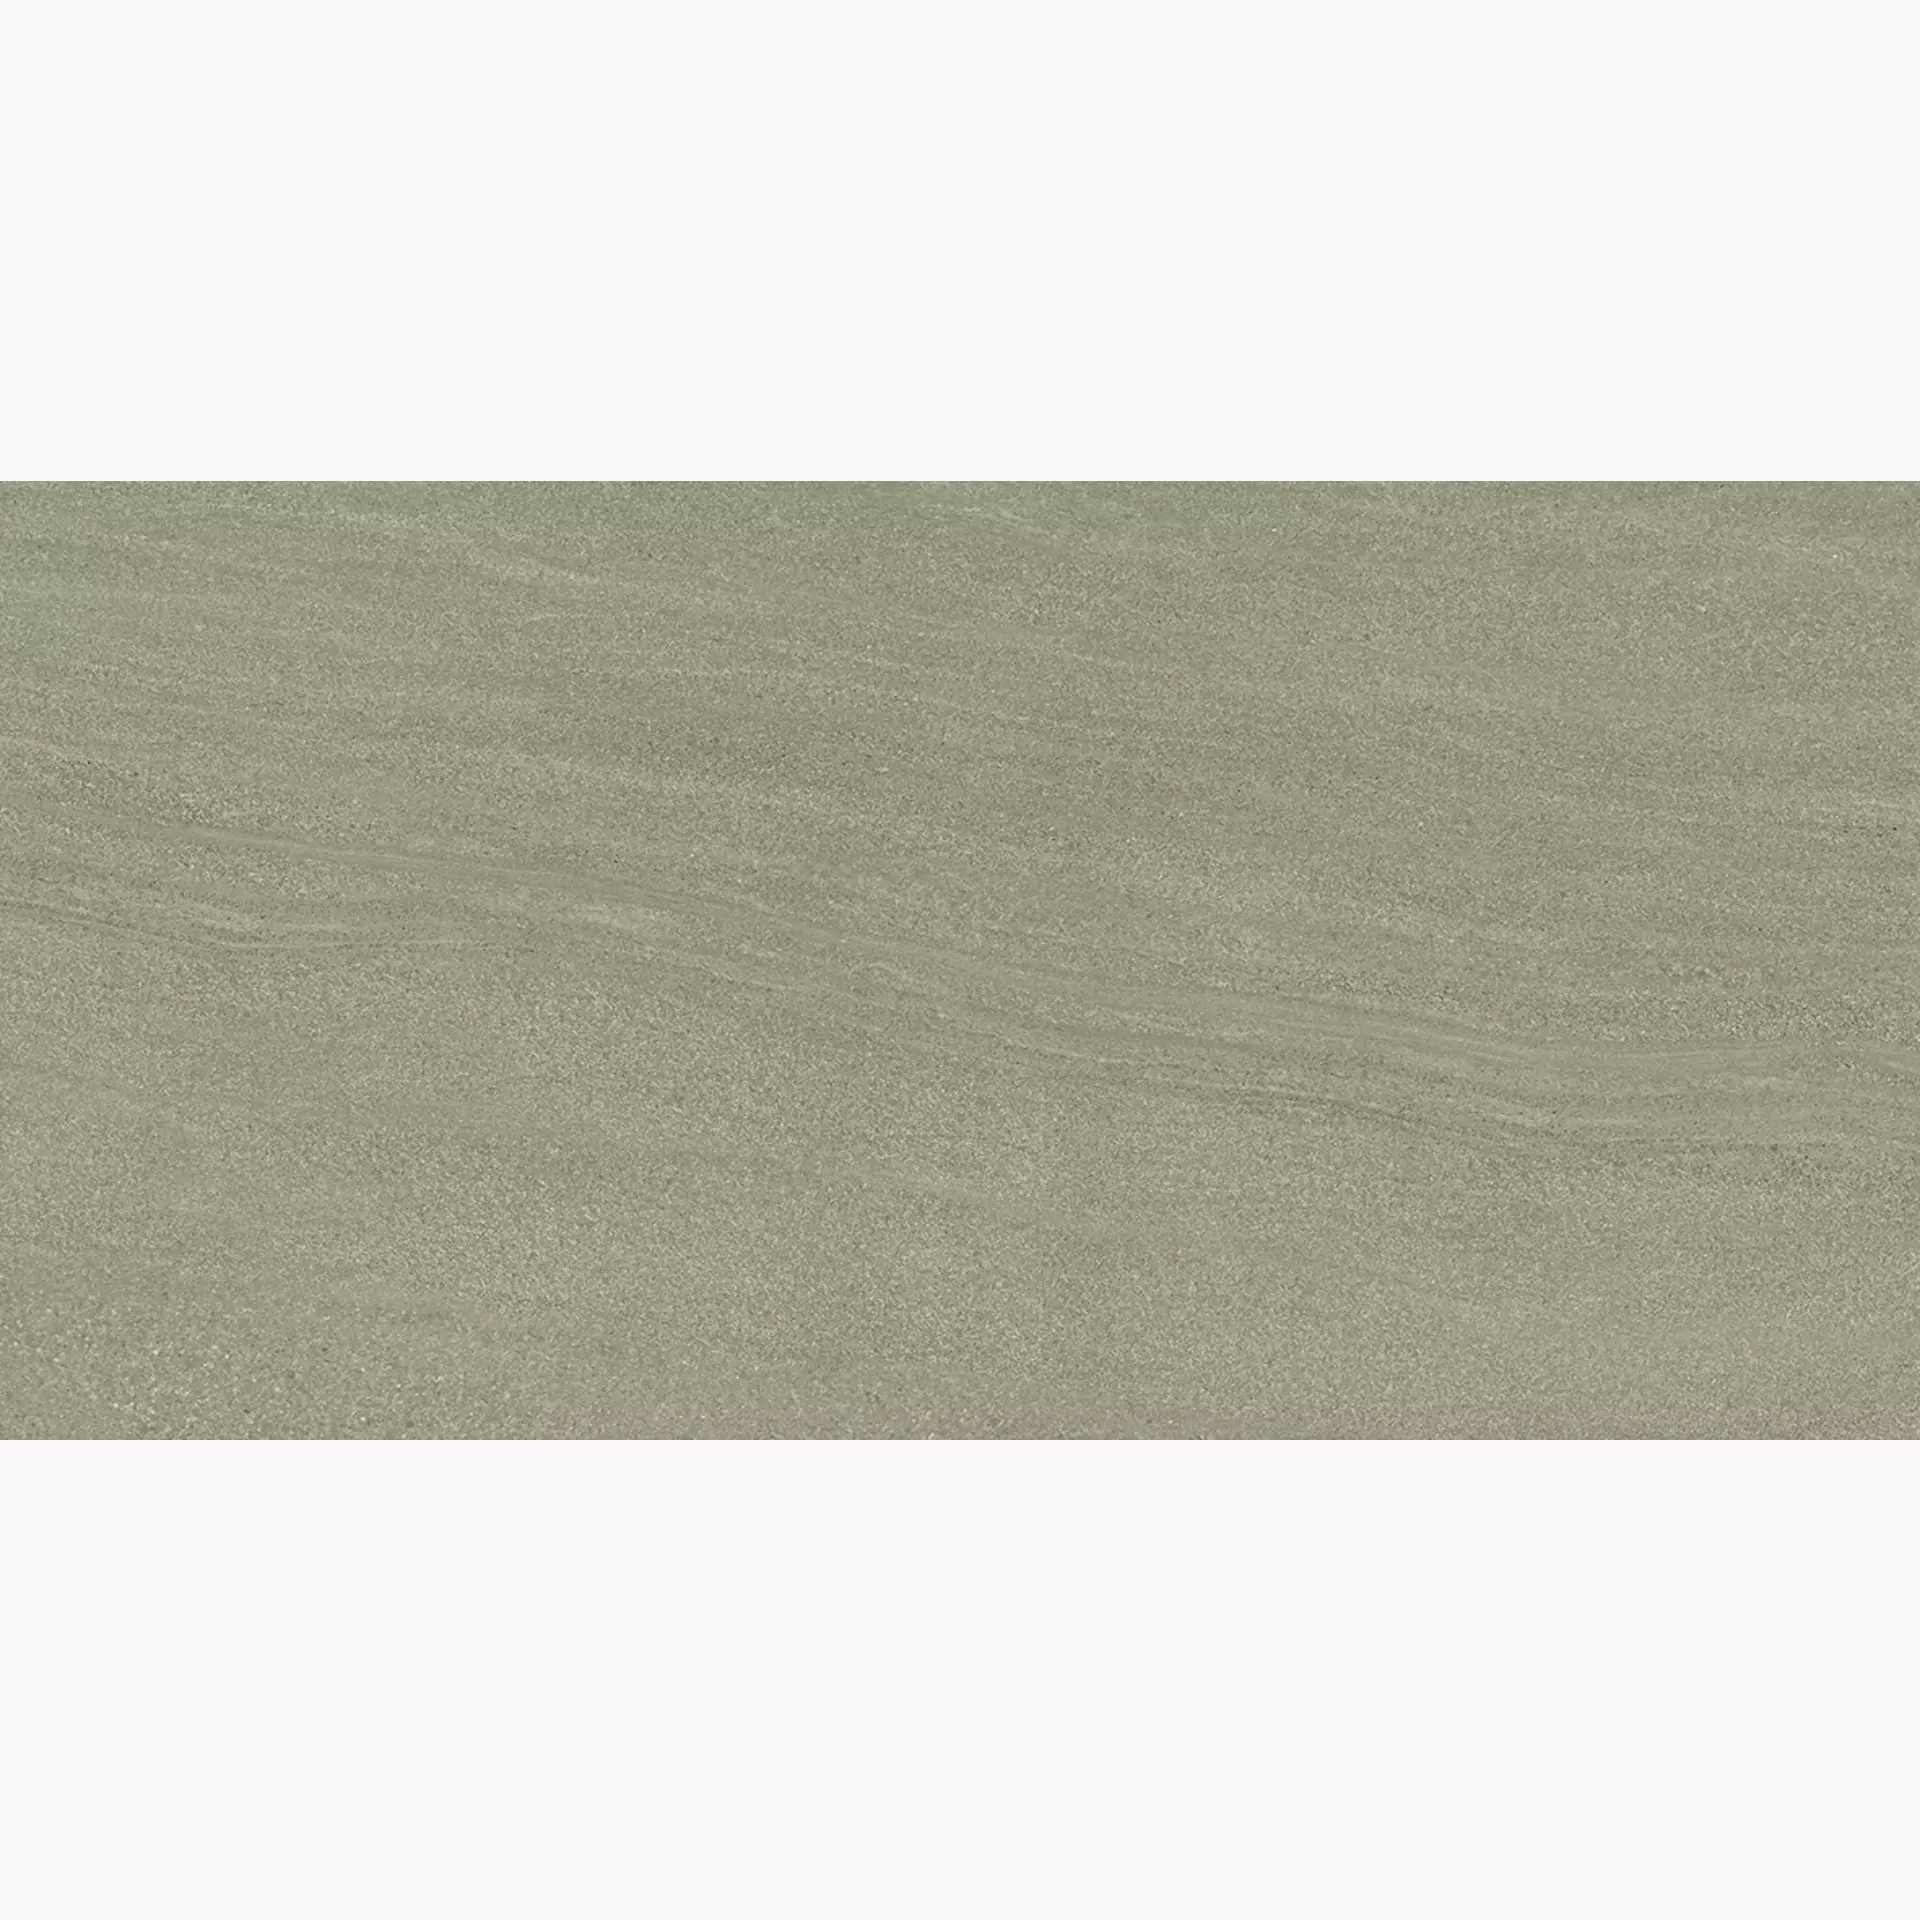 Ergon Elegance Pro Taupe Naturale EJZ3 45x90cm rectified 9,5mm